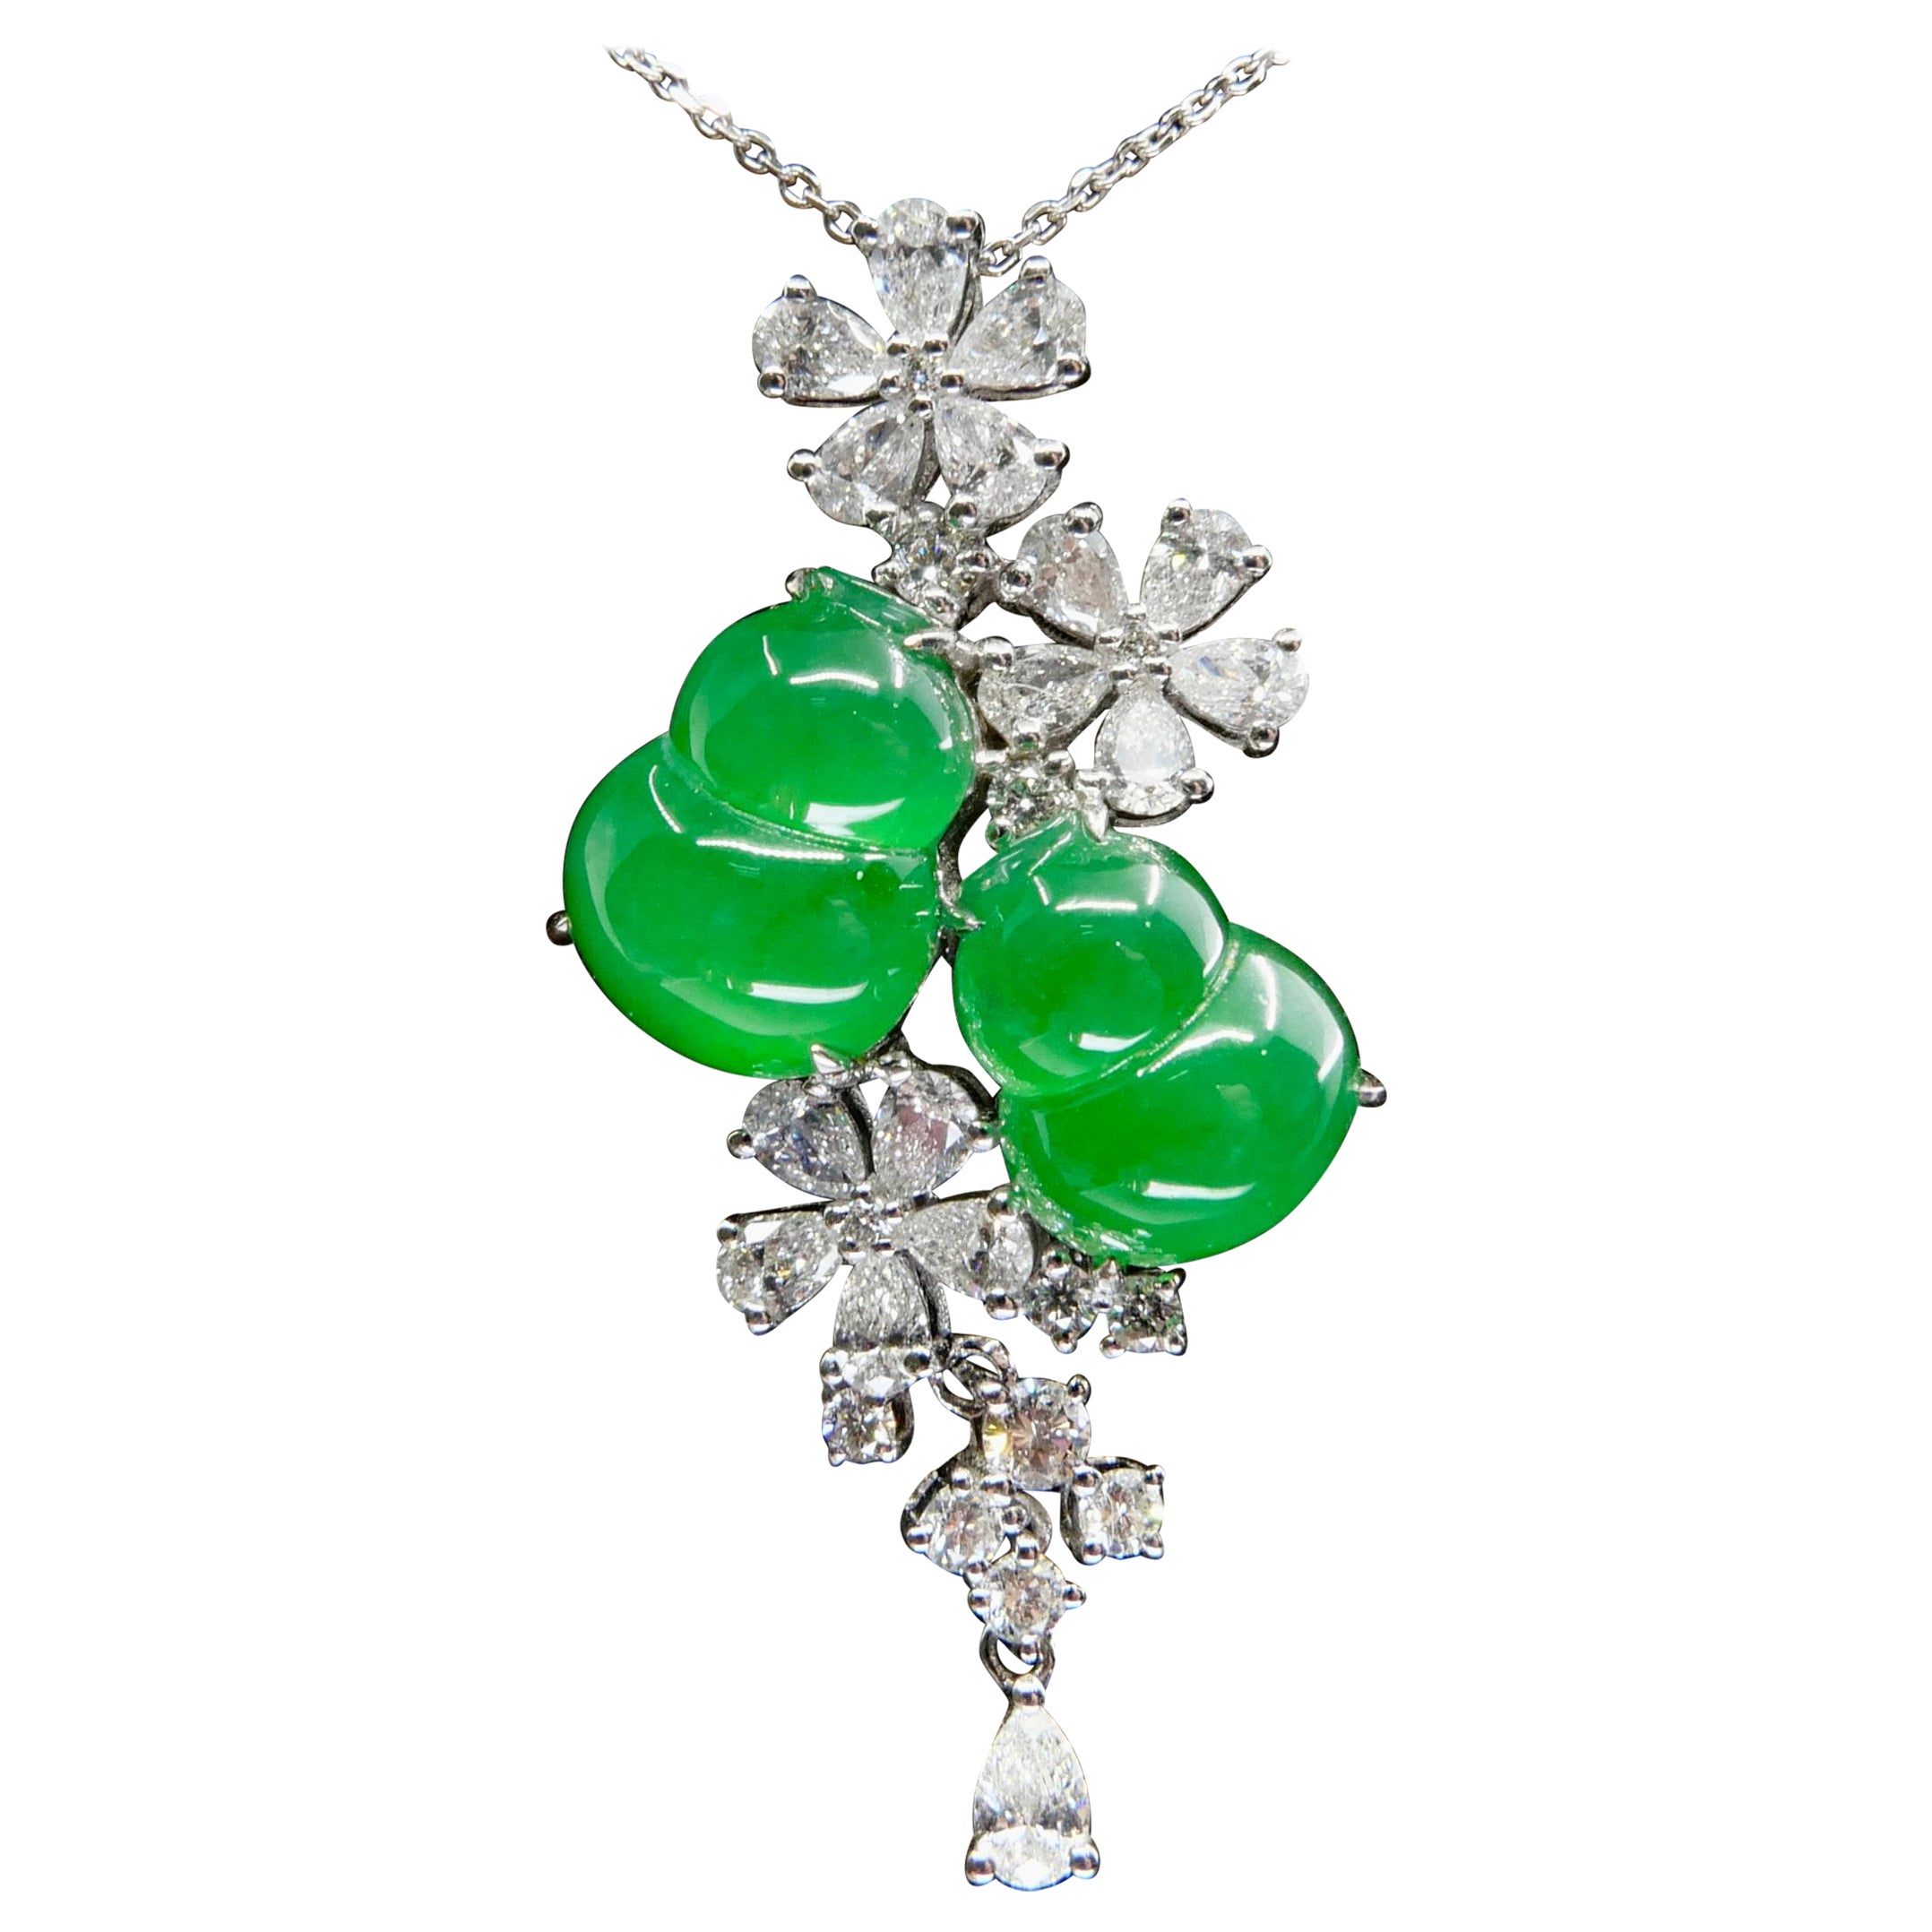 Certified Type A Icy Jade Gourd Diamond Pendant Necklace, Intense Apple Green